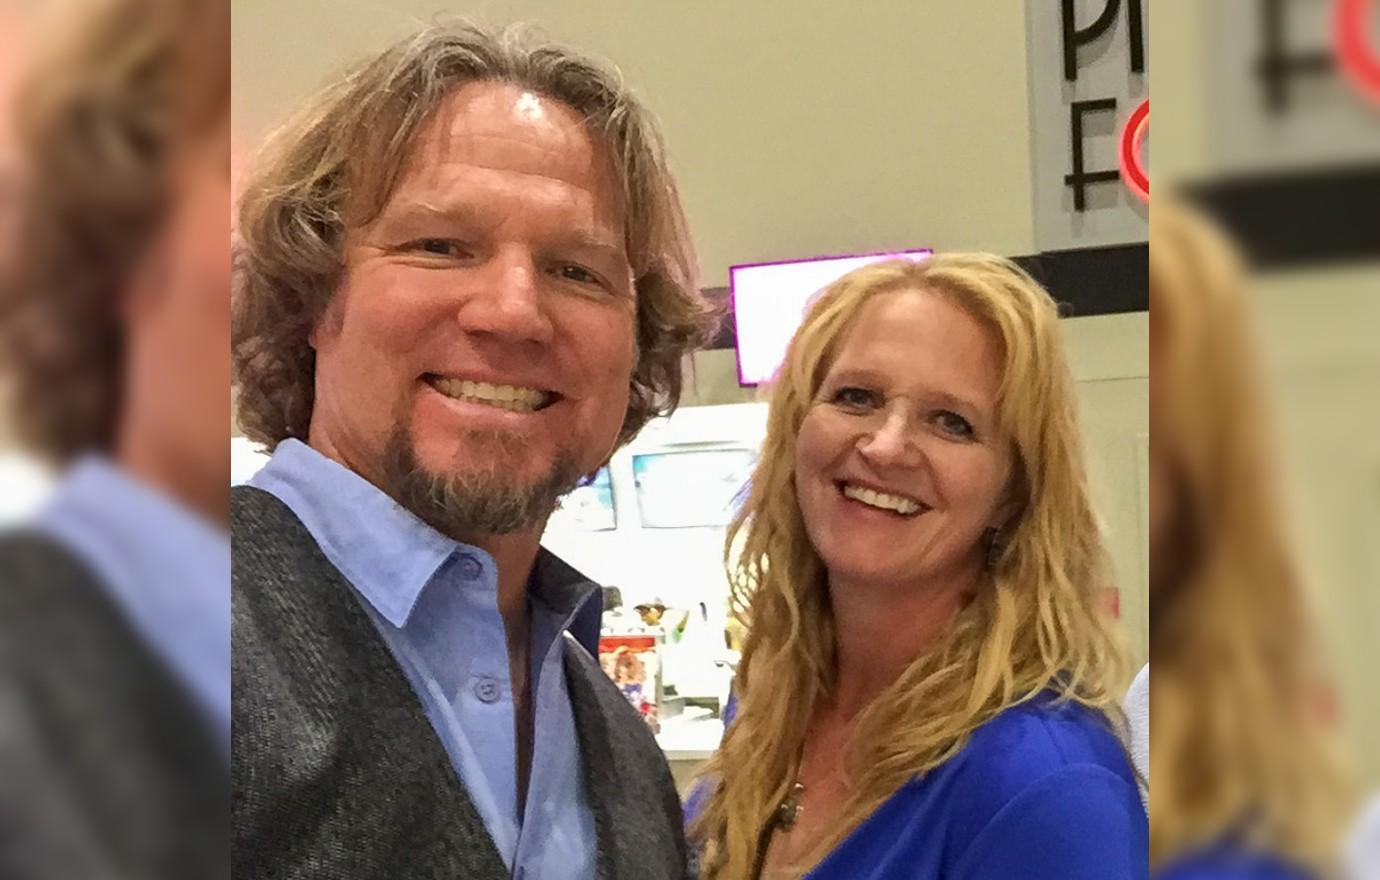 Sister Wives' Christine Brown Laughs at 'First Wives Club' Meme